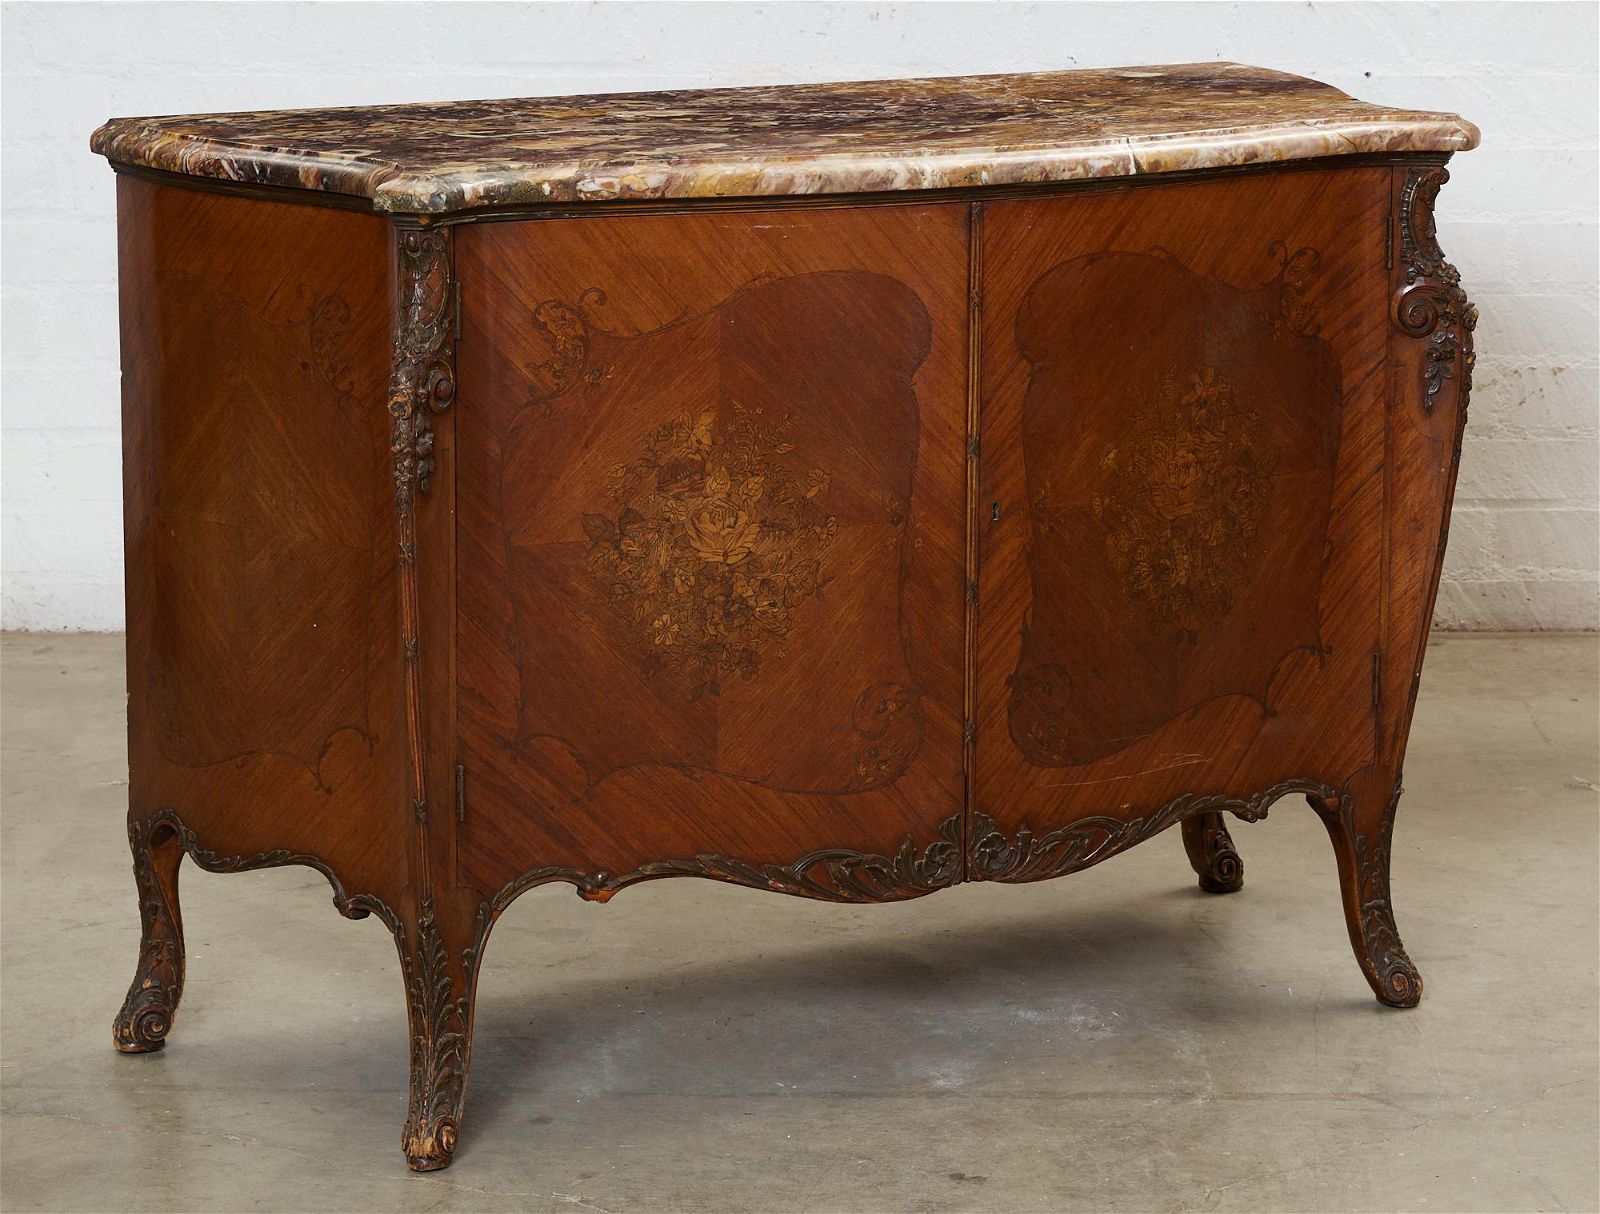 A LOUIS XV STYLE MARQUETRY INLAID